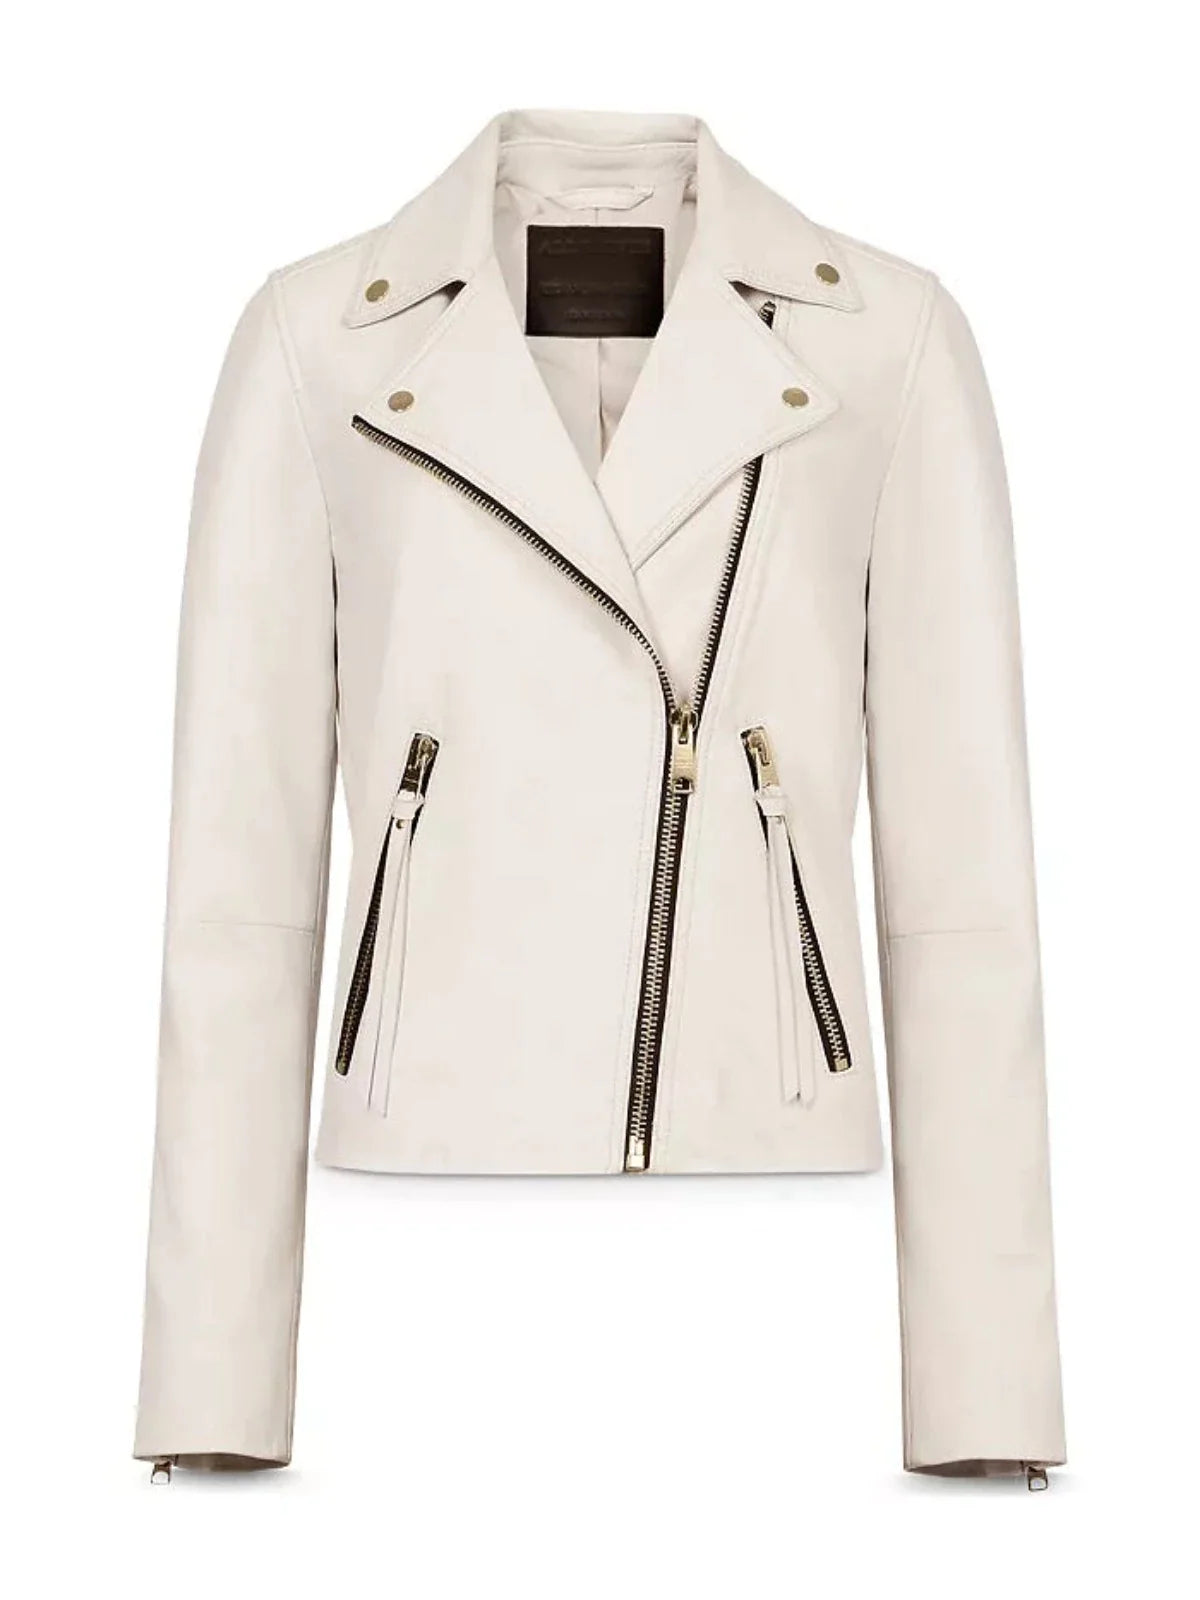 Womens Delby Ivory White Leather Jacket